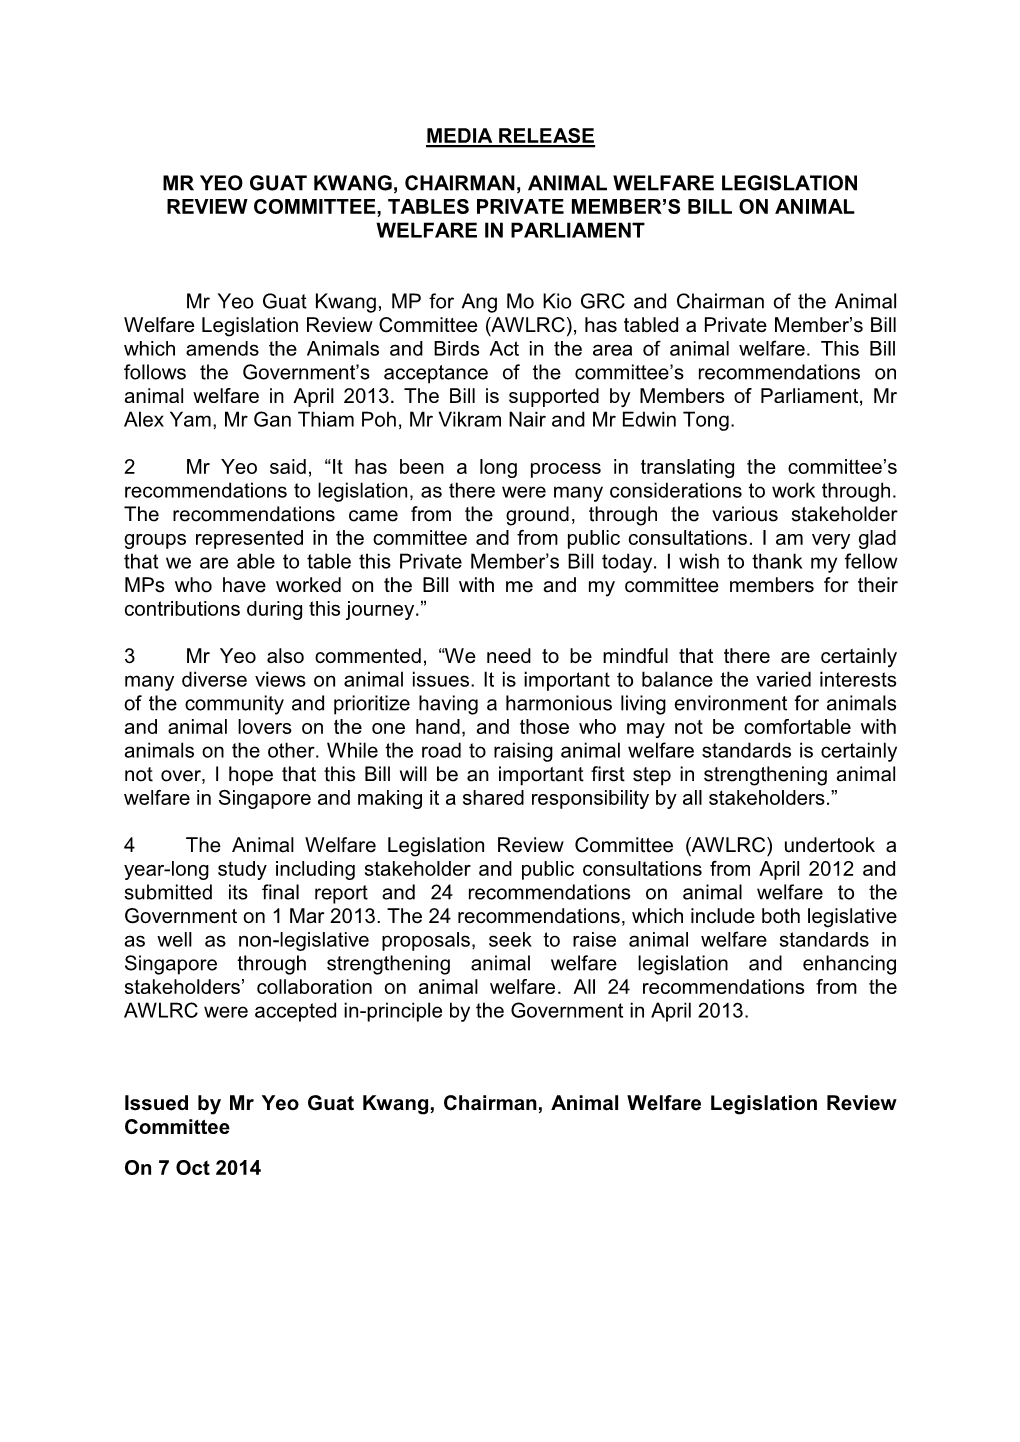 Media Release Mr Yeo Guat Kwang, Chairman, Animal Welfare Legislation Review Committee, Tables Private Member's Bill on Animal